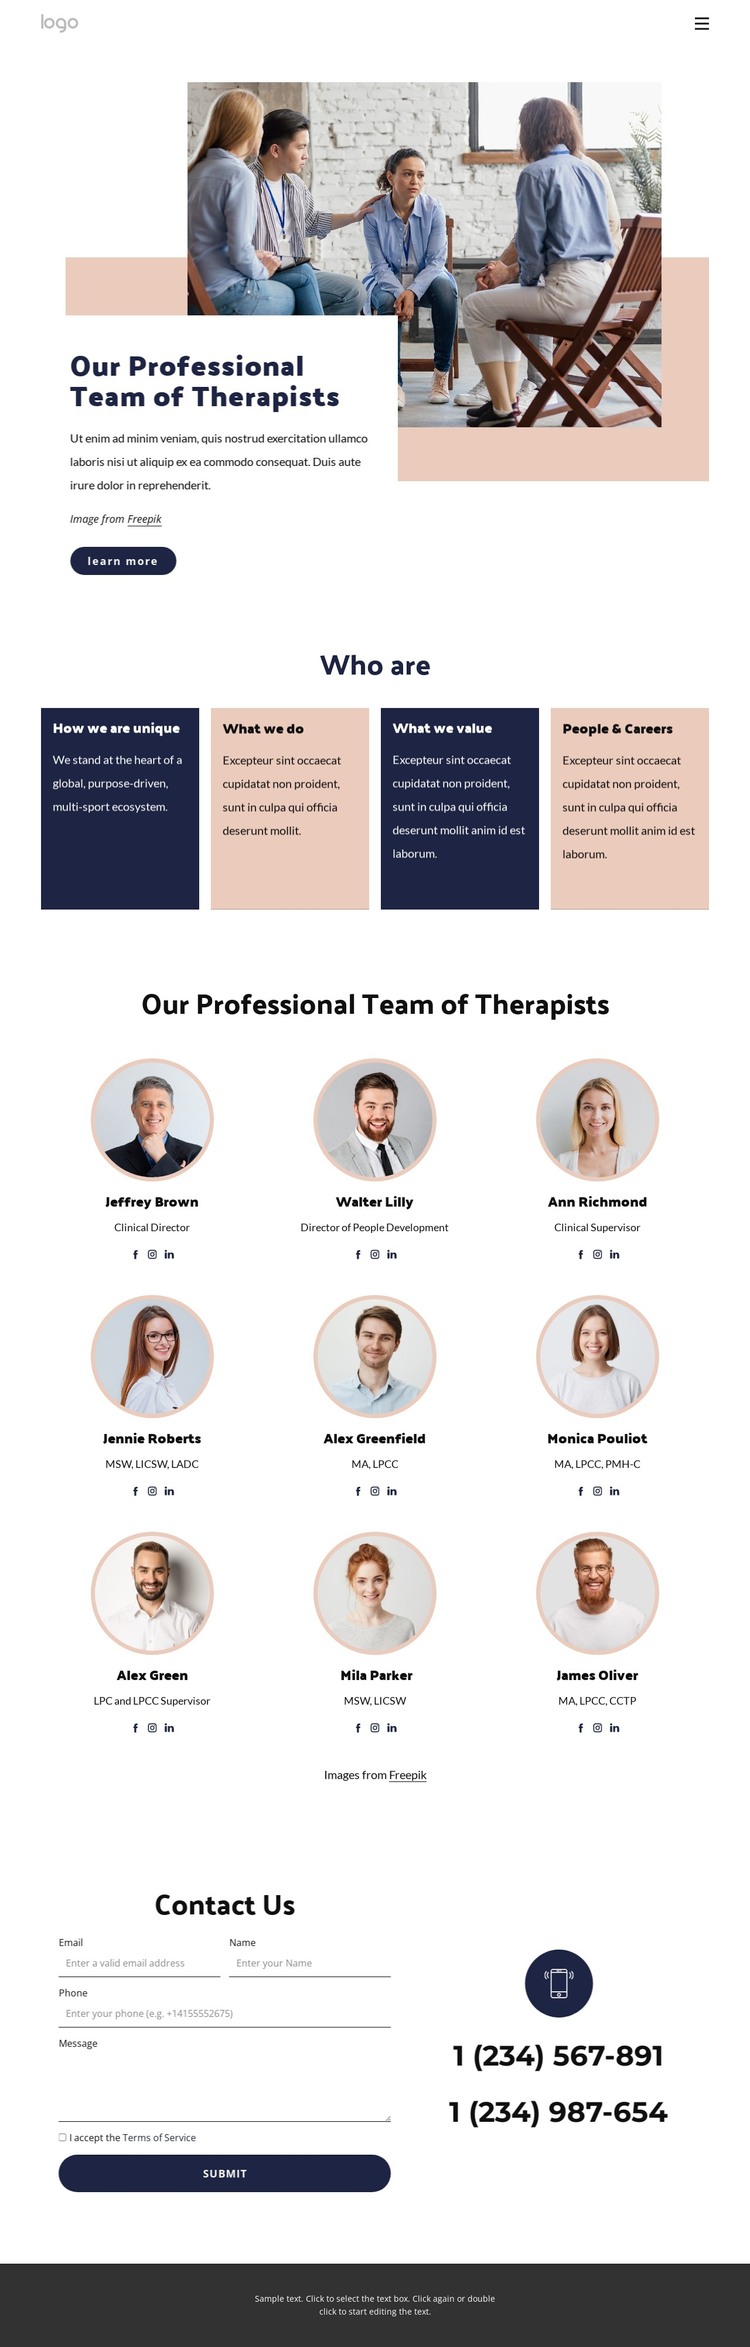 Our professional team of therapists Web Design